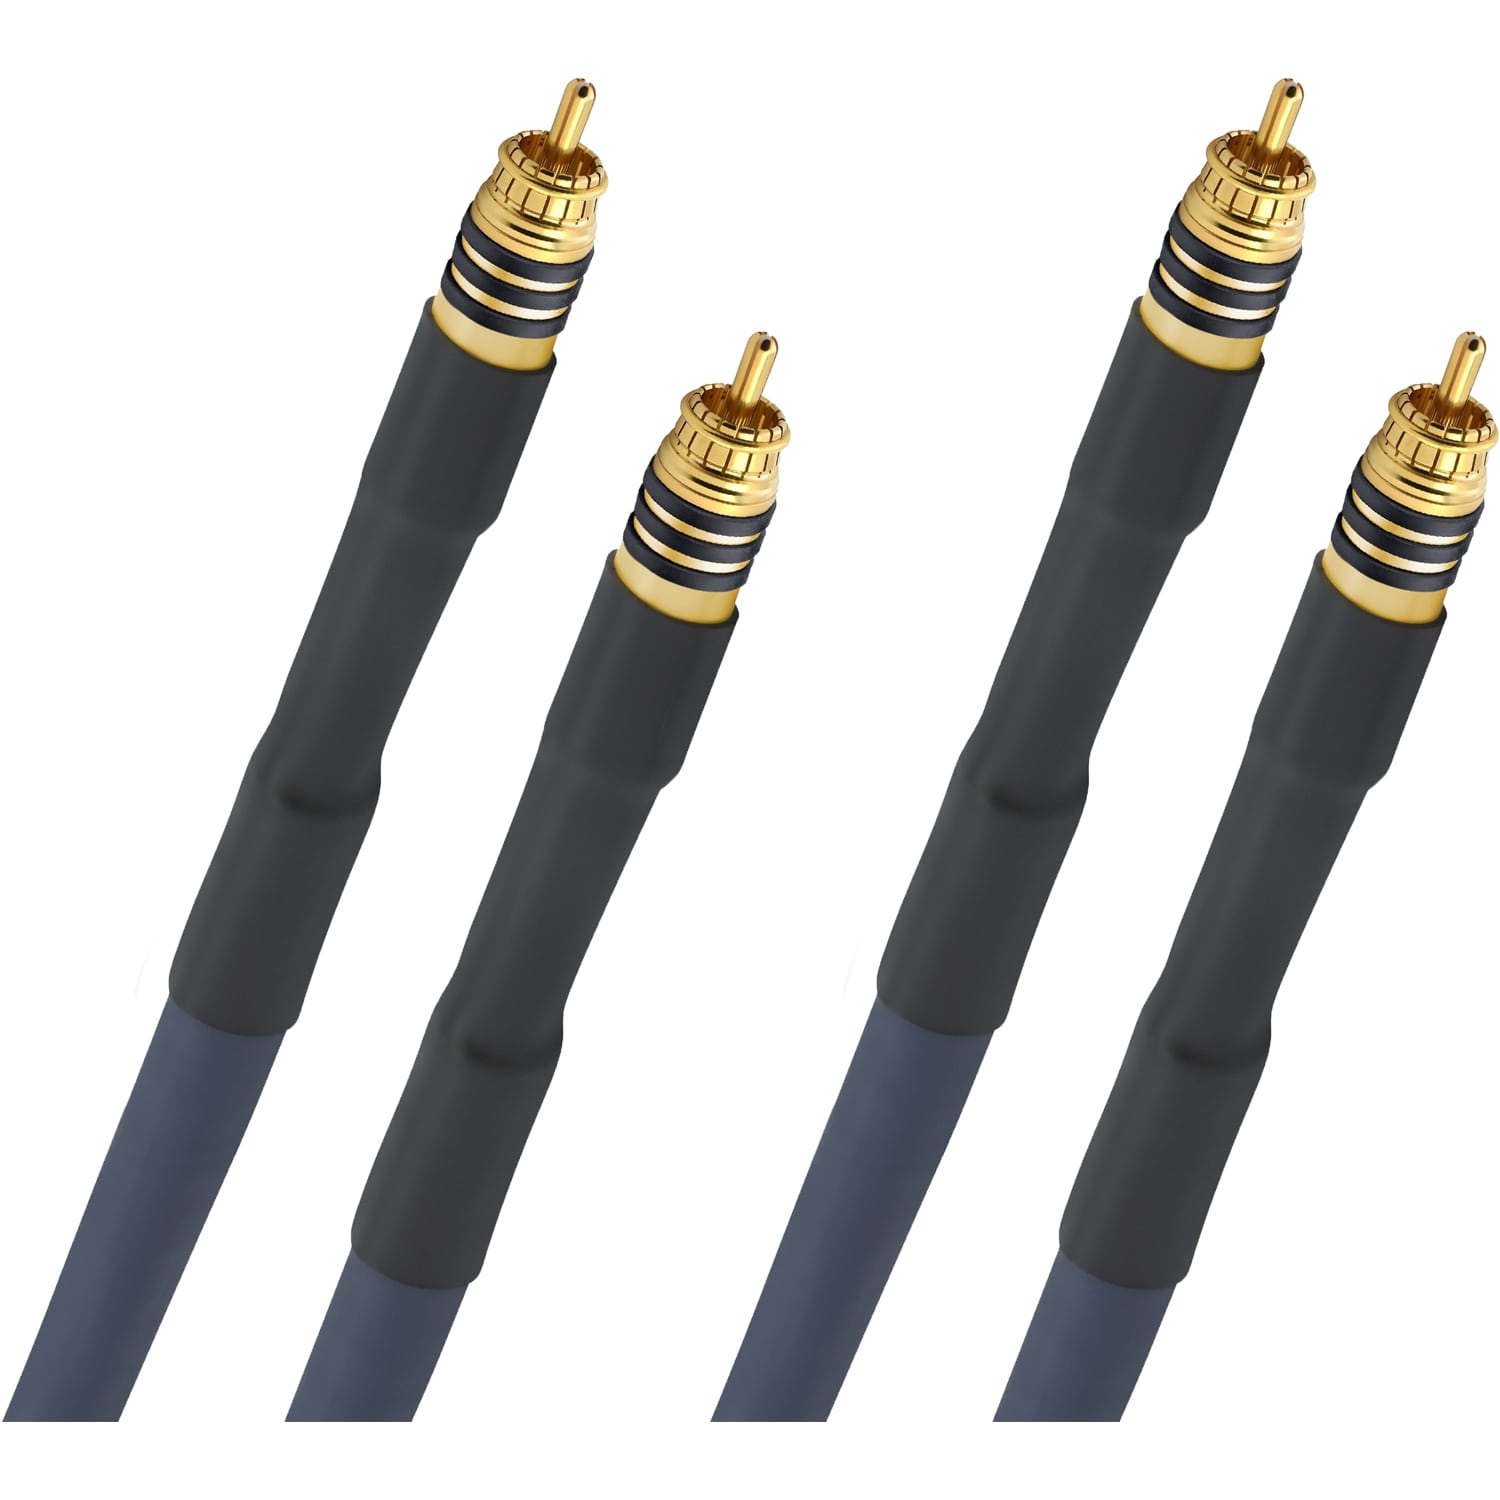 Кабели межблочные аудио Oehlbach STATE OF THE ART XXL Cable RCA, 2x2,00m, gold, D1C13116 кабели межблочные аудио oehlbach state of the art xxl cable xlr 2x1 50m gold d1c13134